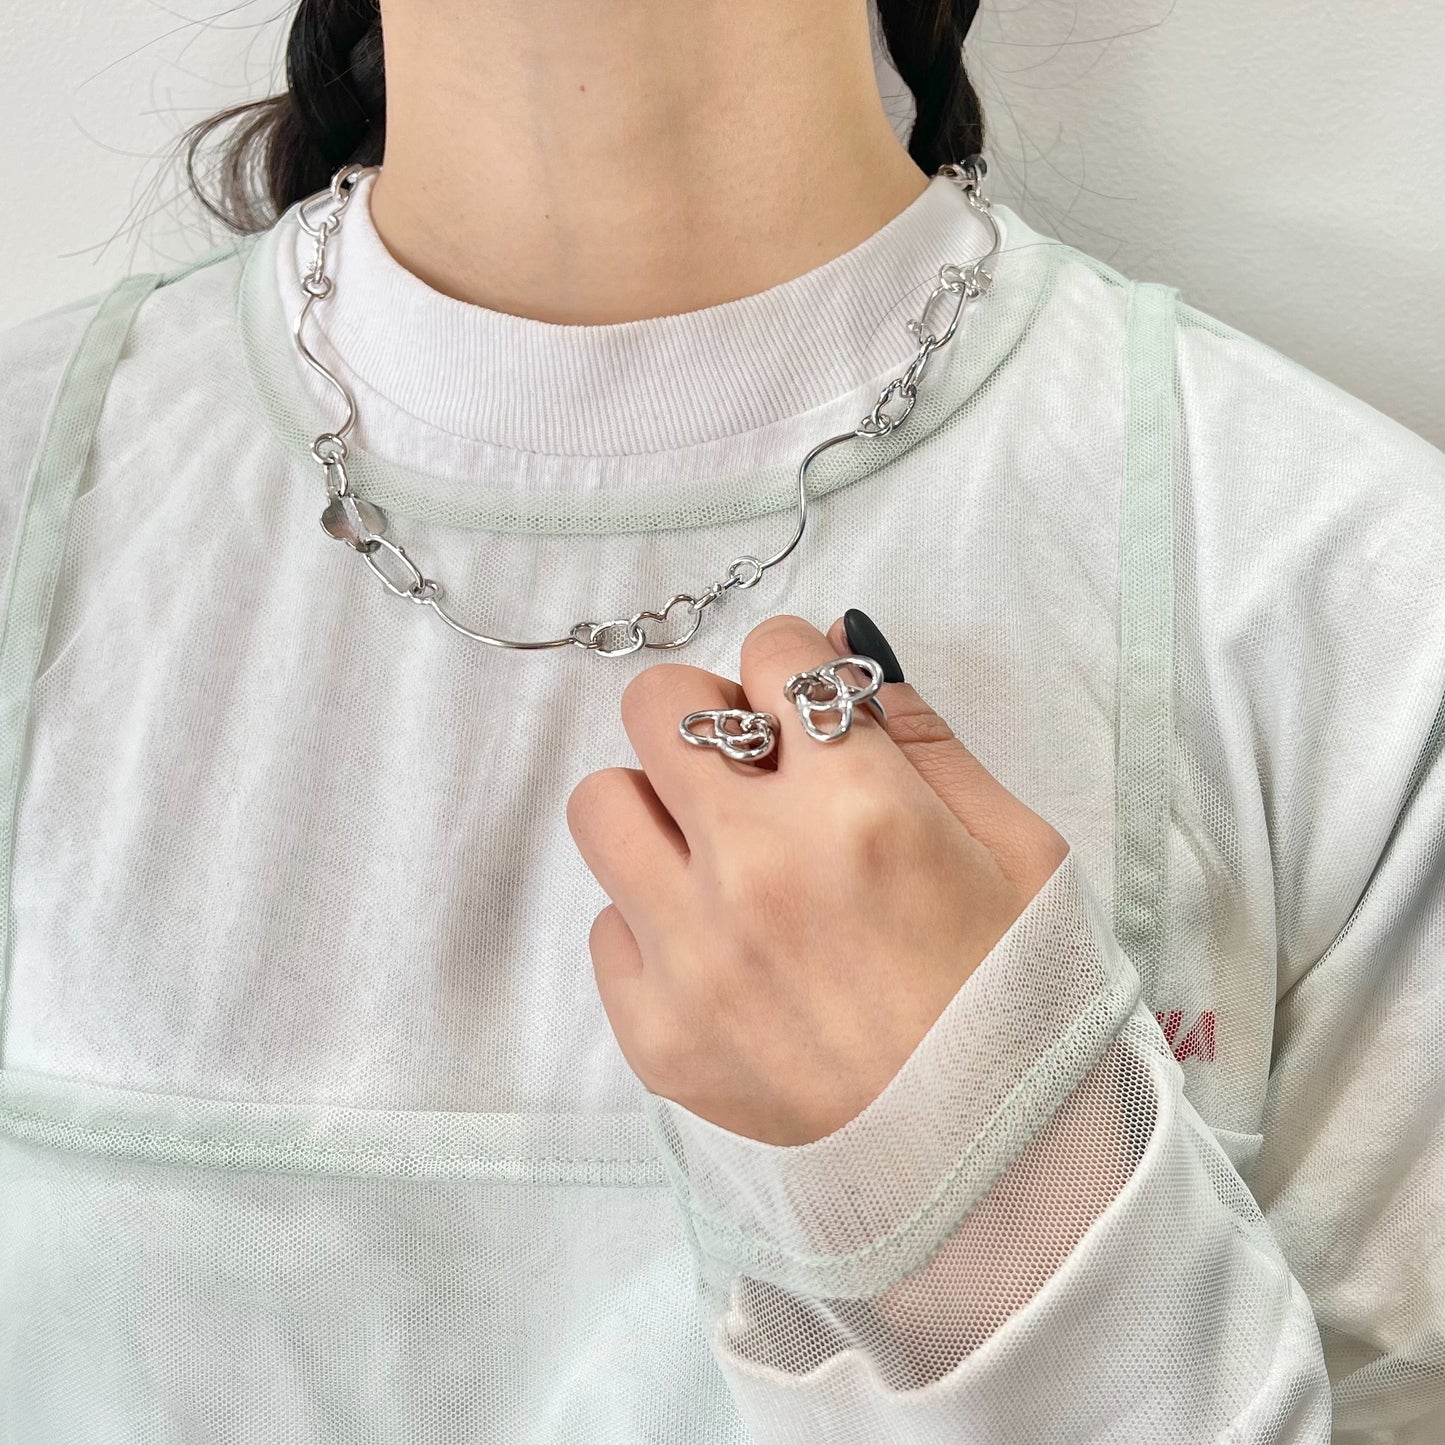 o.watery / heart chain necklace / silver / ハート